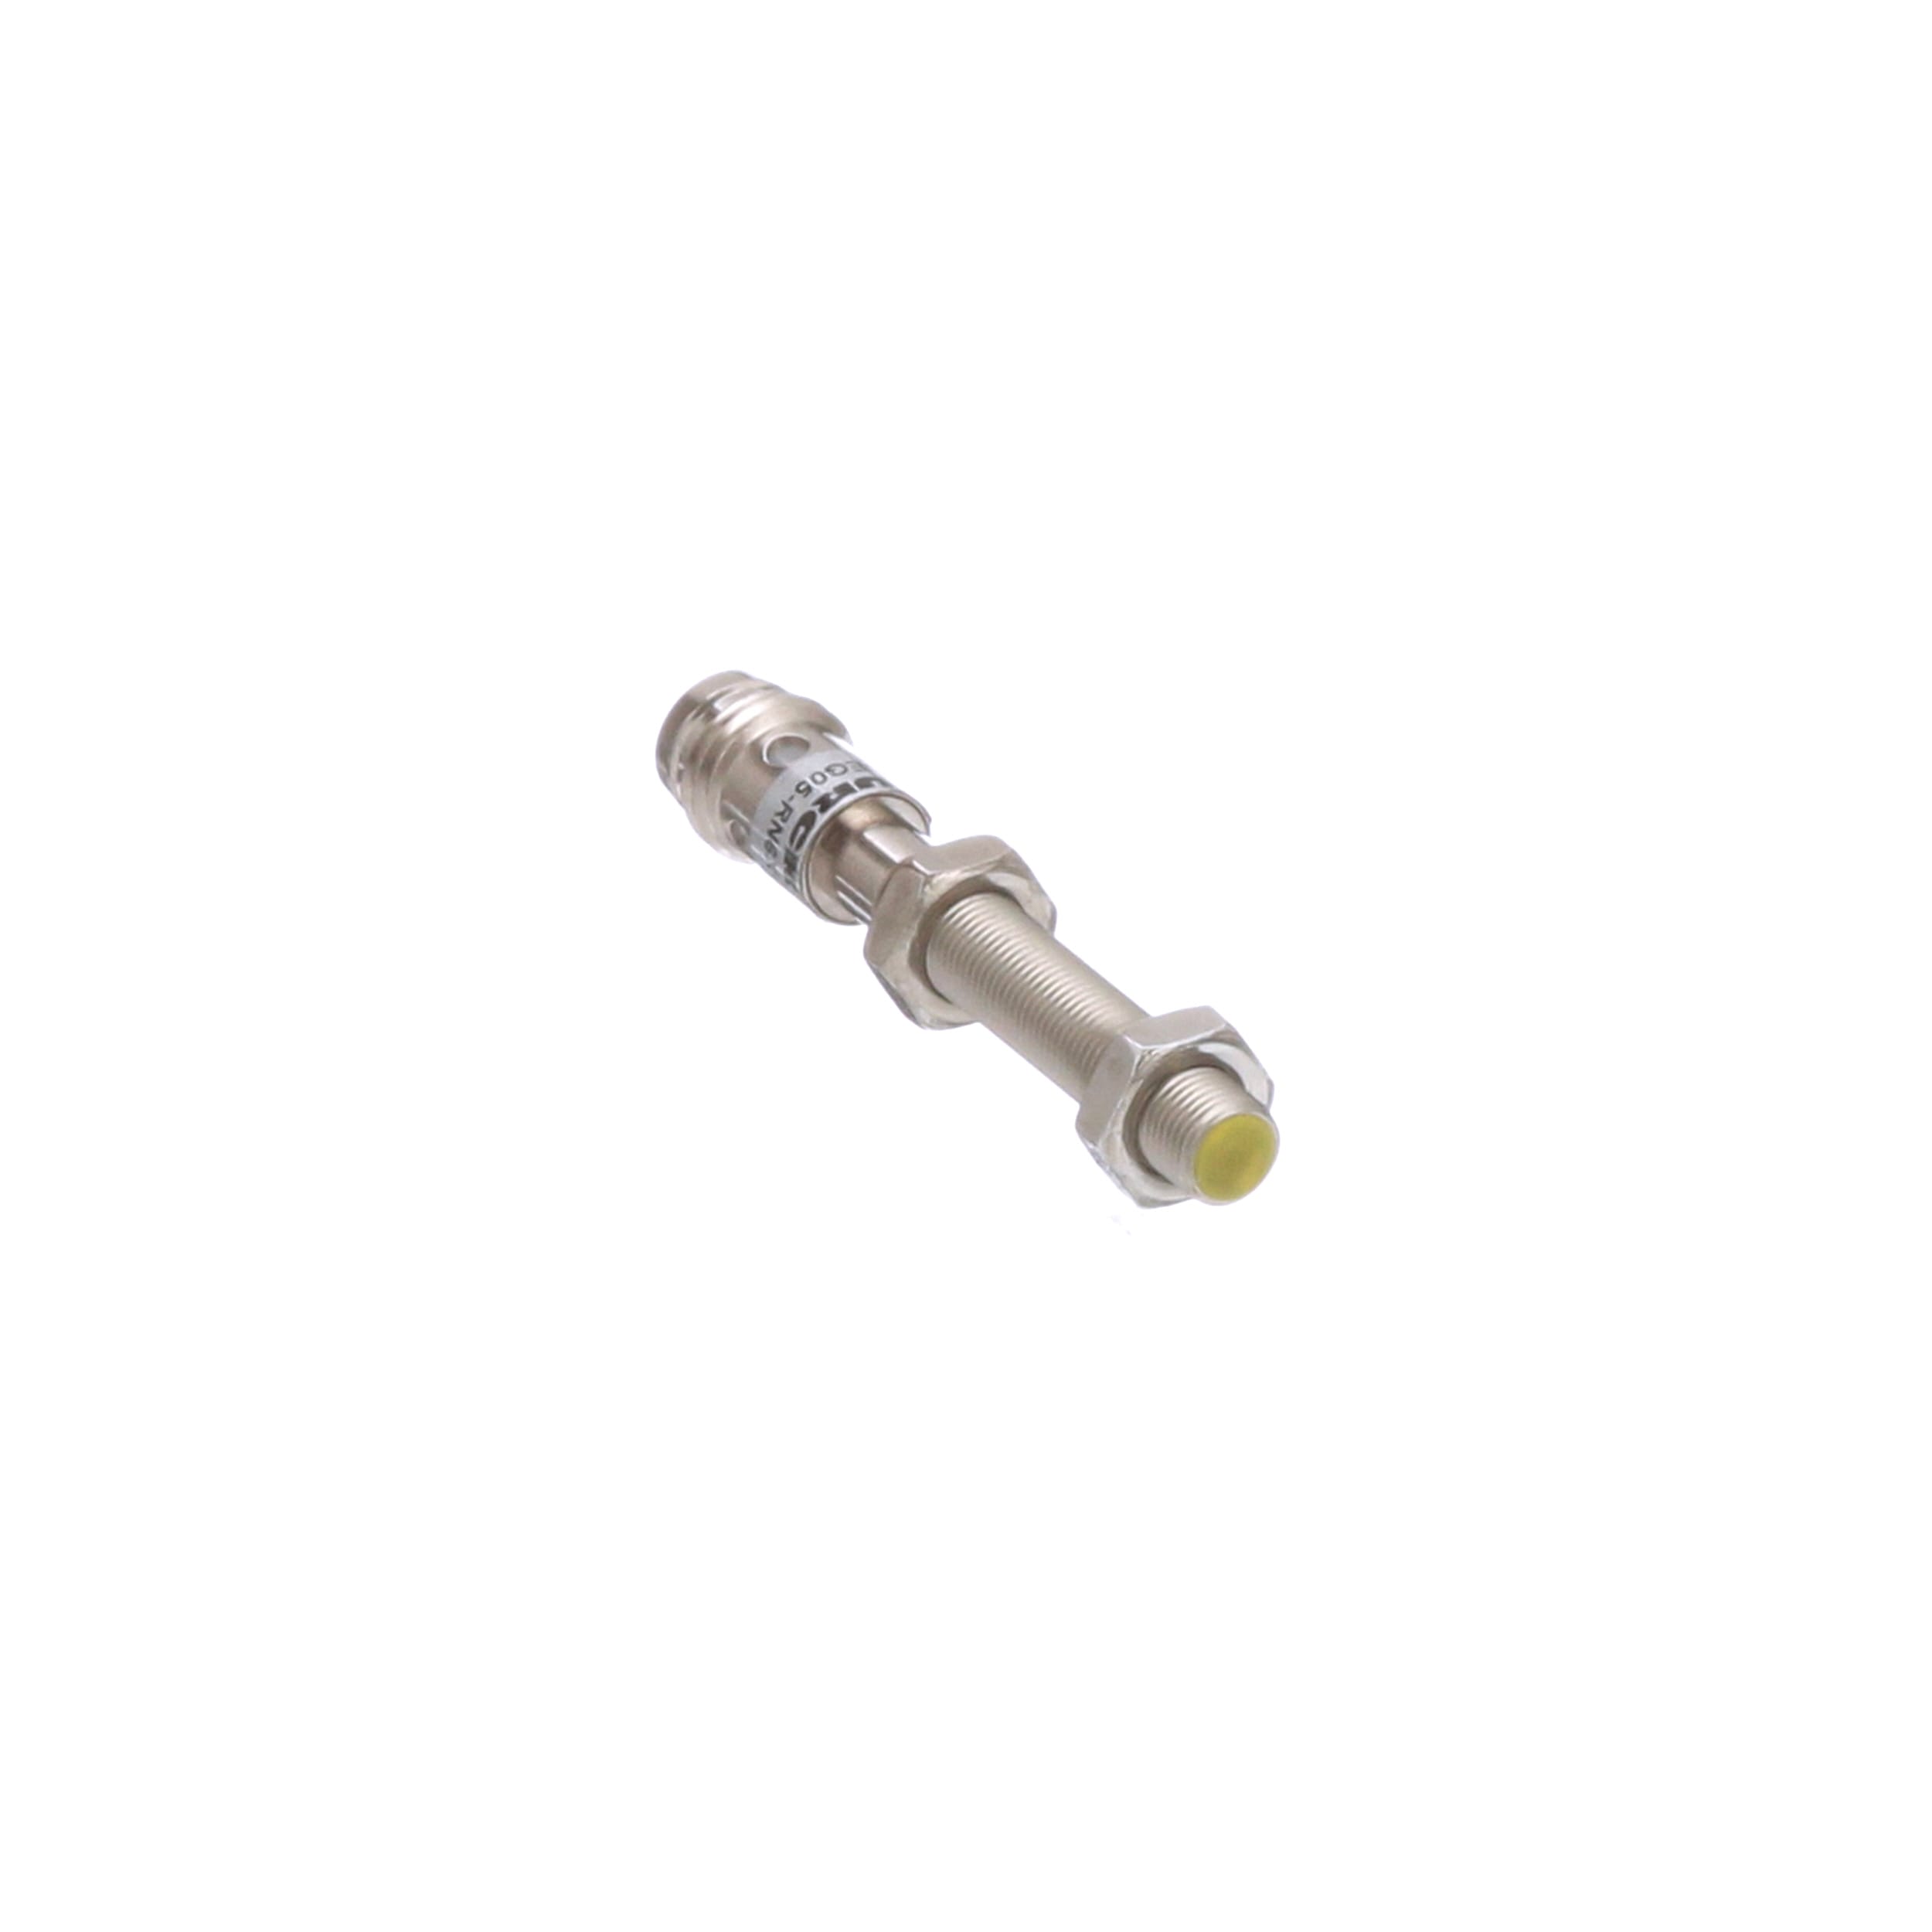 Details about   Turck Bi1-EG05-AN6X-V1331 Inductive Proximity Sensor Switch 3-Wire NPN 7ft Cable 